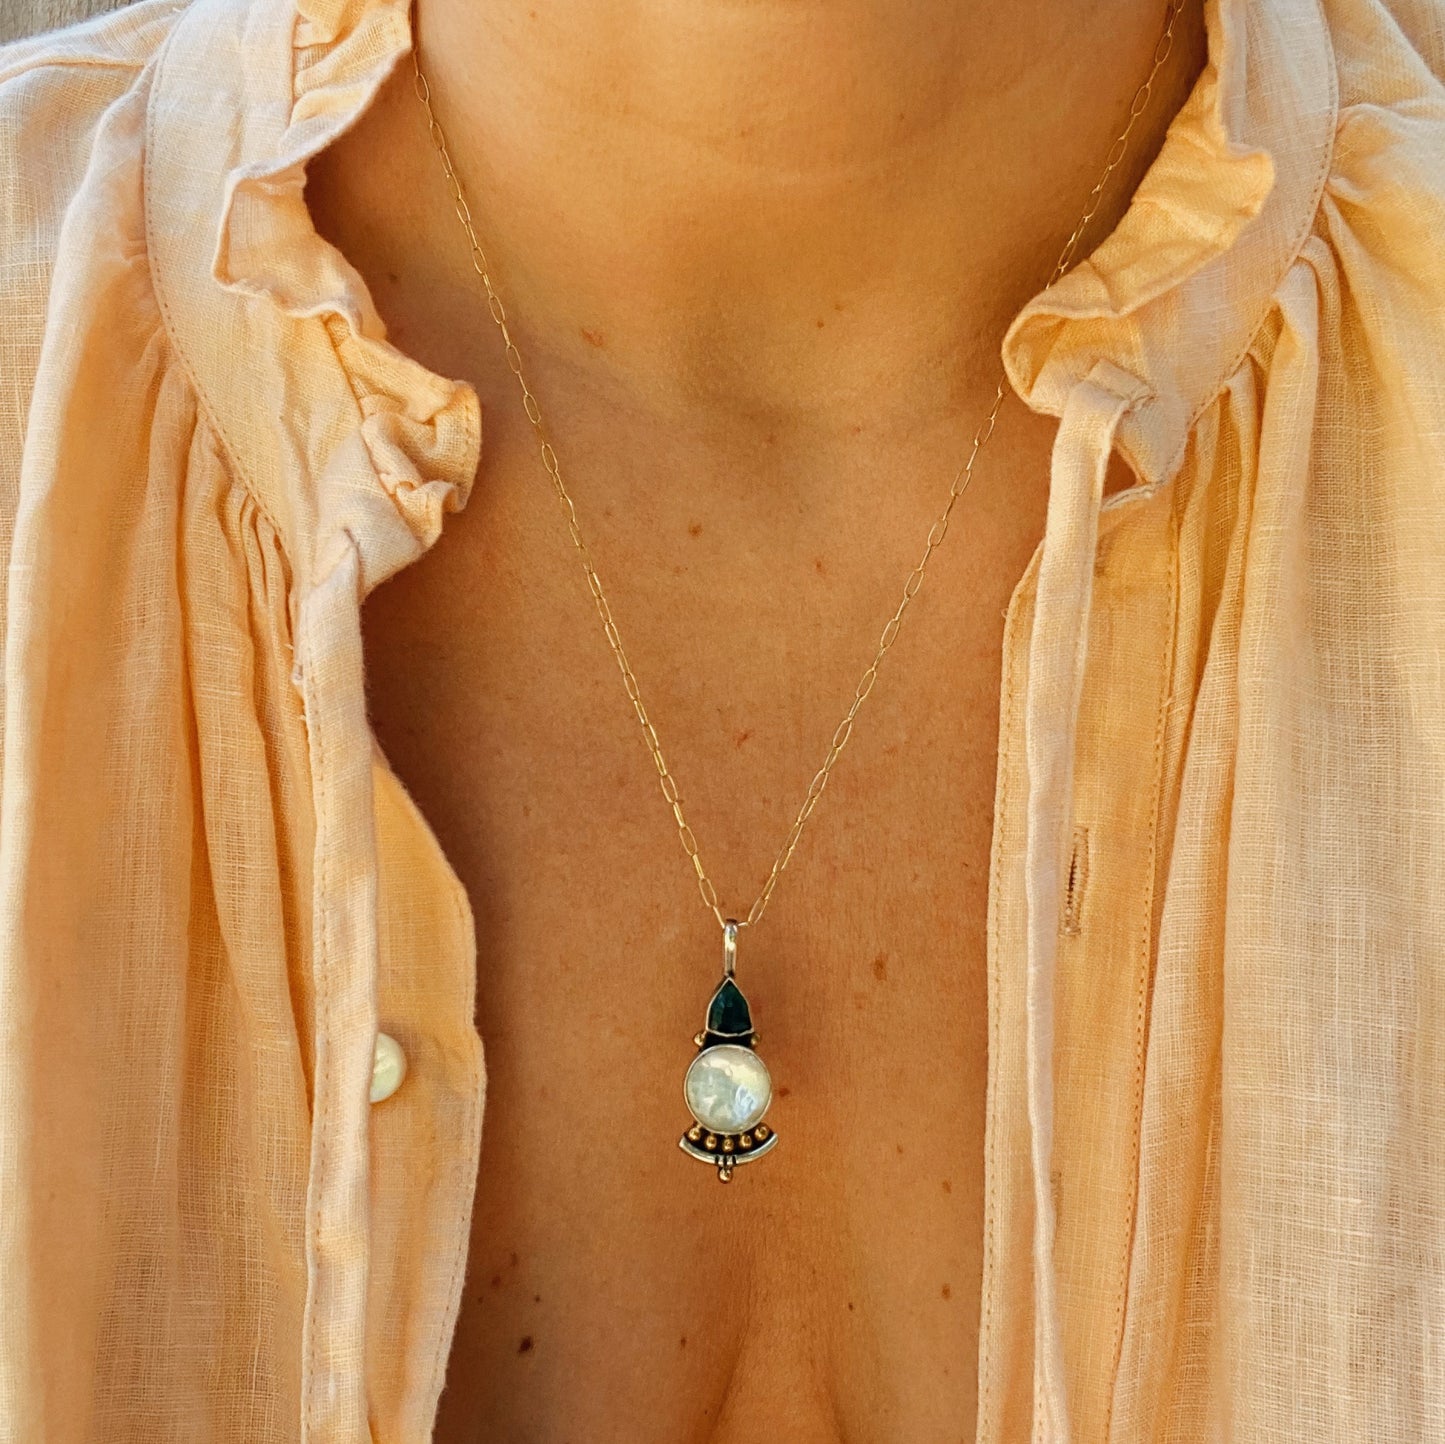 Origin Necklace (A) ◇ Faceted Tourmaline + Mother of Pearl